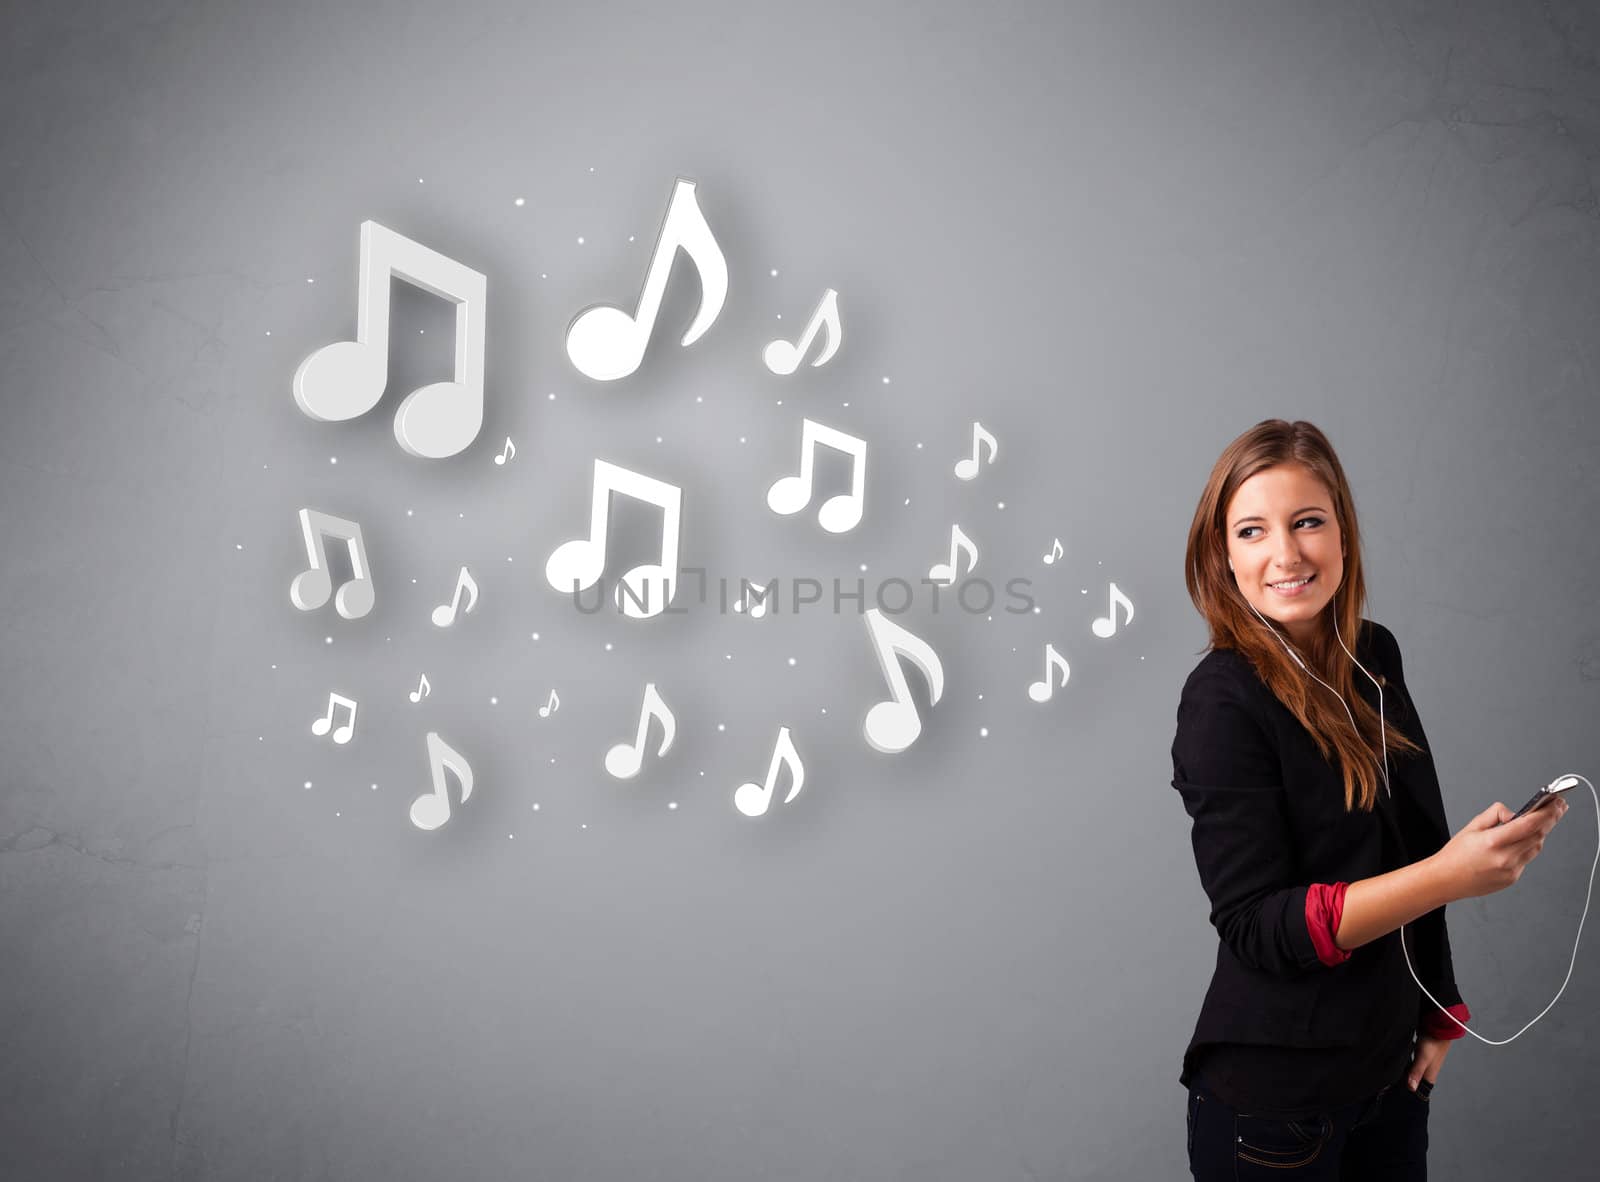 Pretty young woman singing and listening to music with musical notes getting out of her mouth